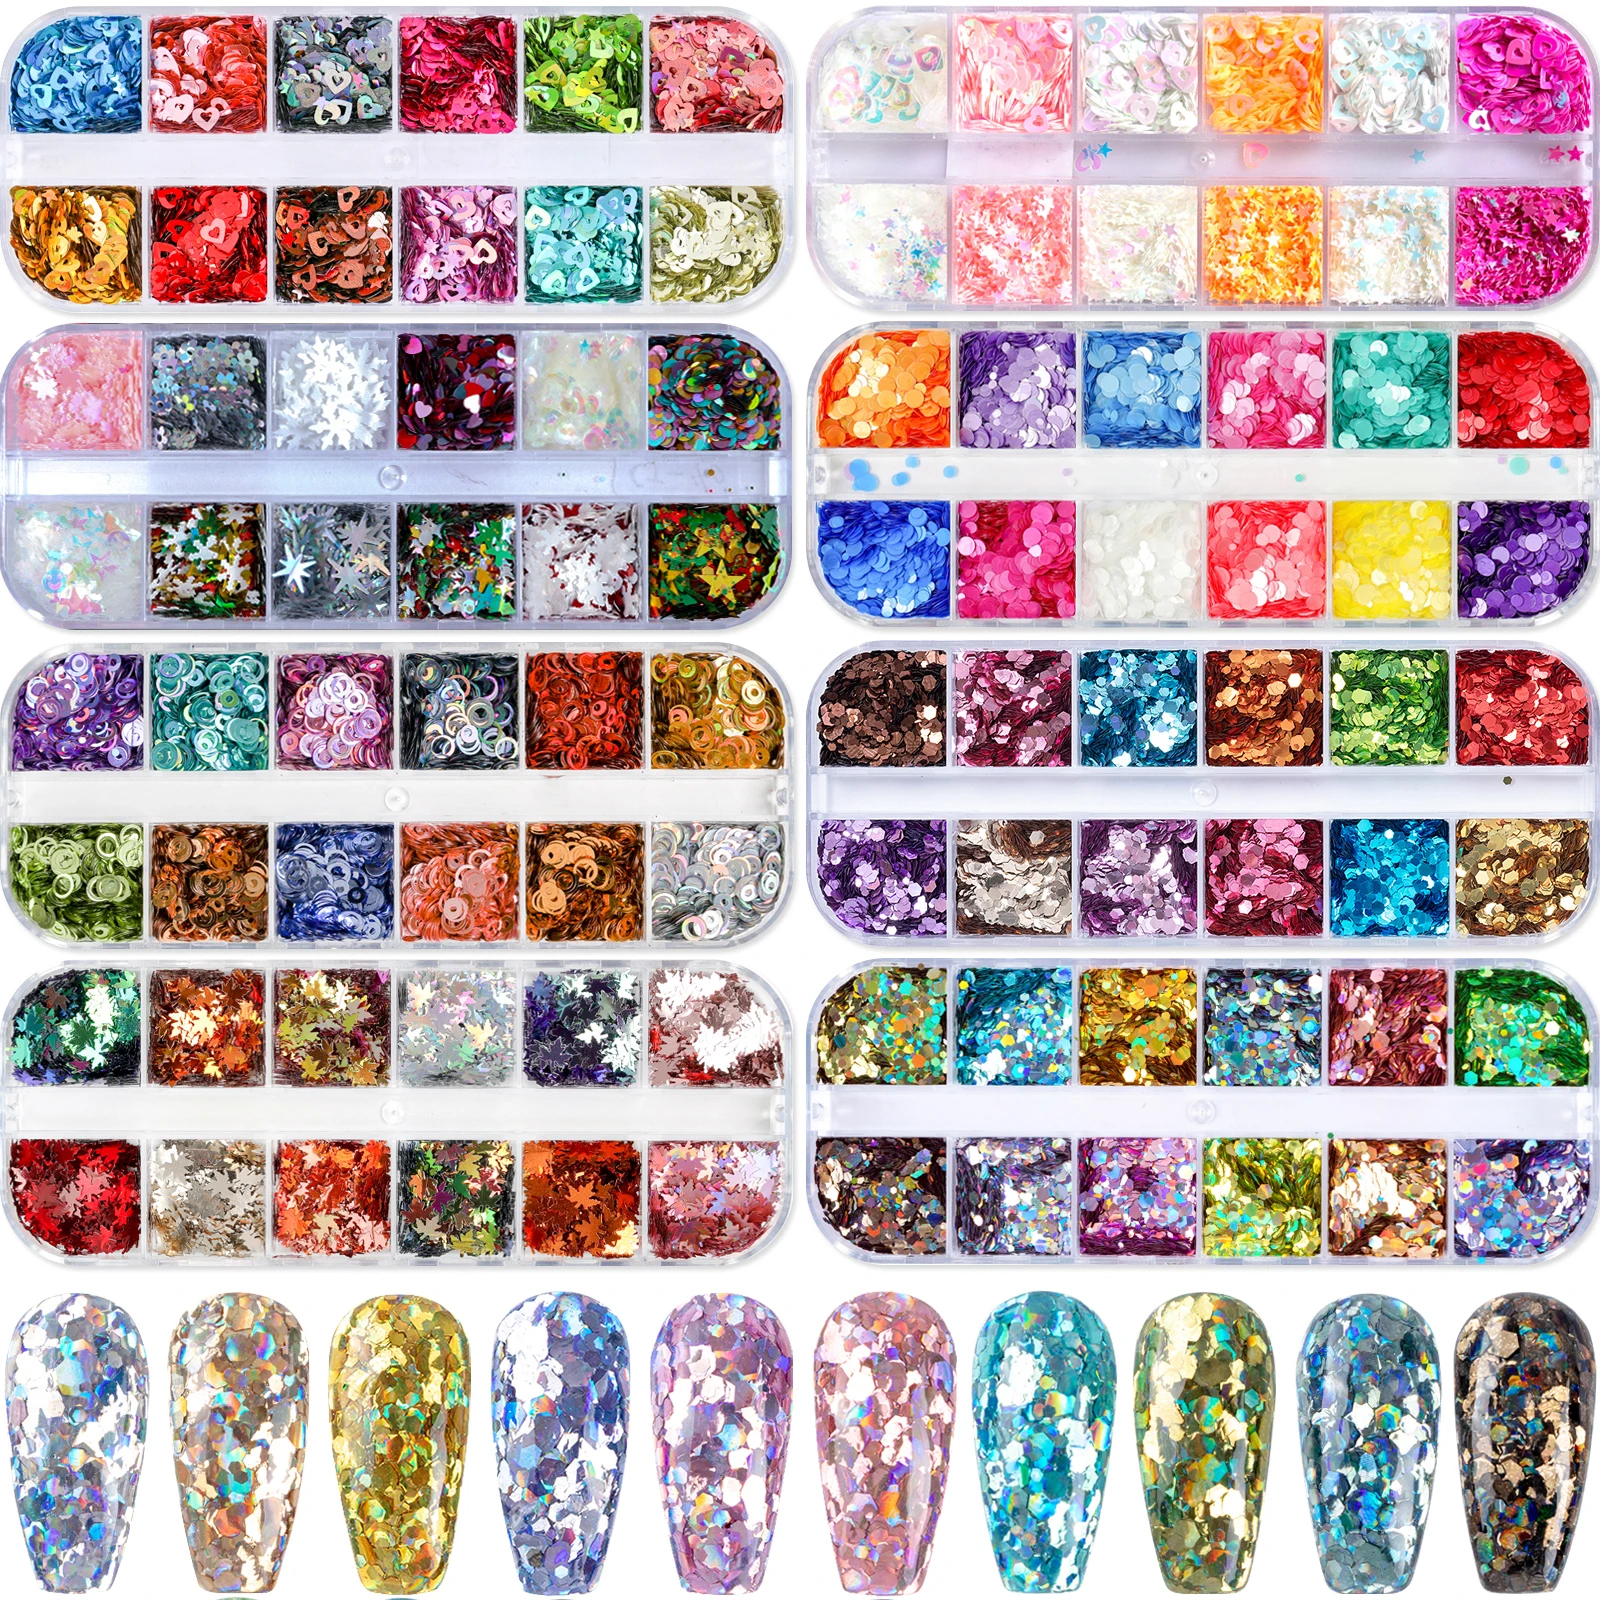 12 Colors Acrylic Nail Art Glitter Sequins Decals Set For Fake Nails Tips Decoration Beauty Manicure Tools Mouse